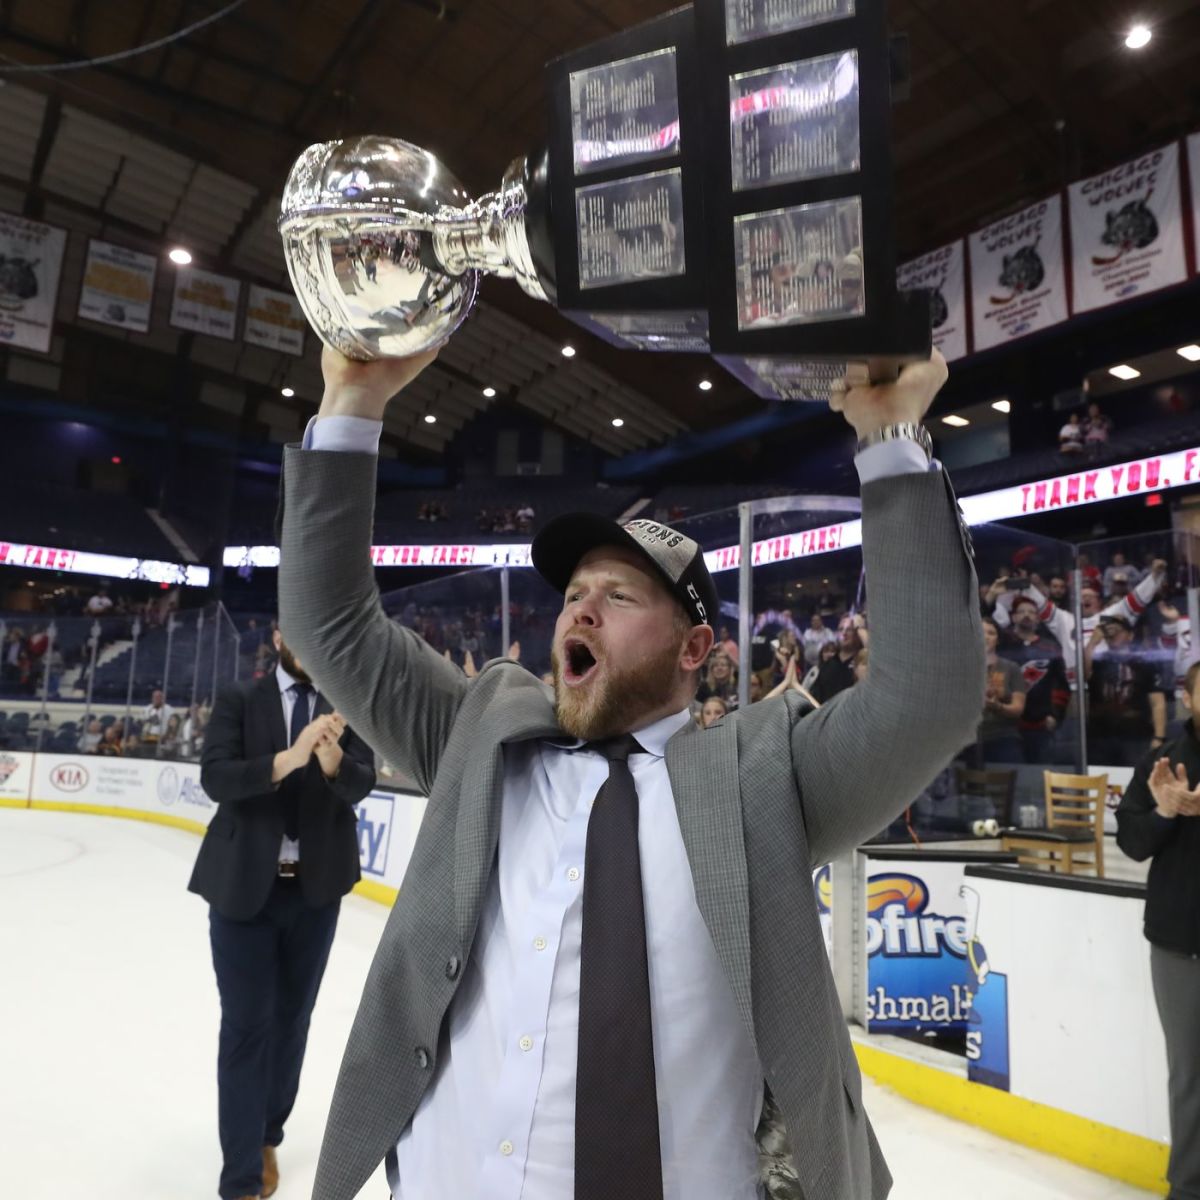 Wolves Head Coach Ryan Warsofsky hoisting the Calder Cup in 2019. Warsofsky was an assistant coach on the Checkers team that beat the Wolves in the 2019 Calder Cup Finals. He was named head coach of the Checkers the following season. Photo: Chicago Wolves